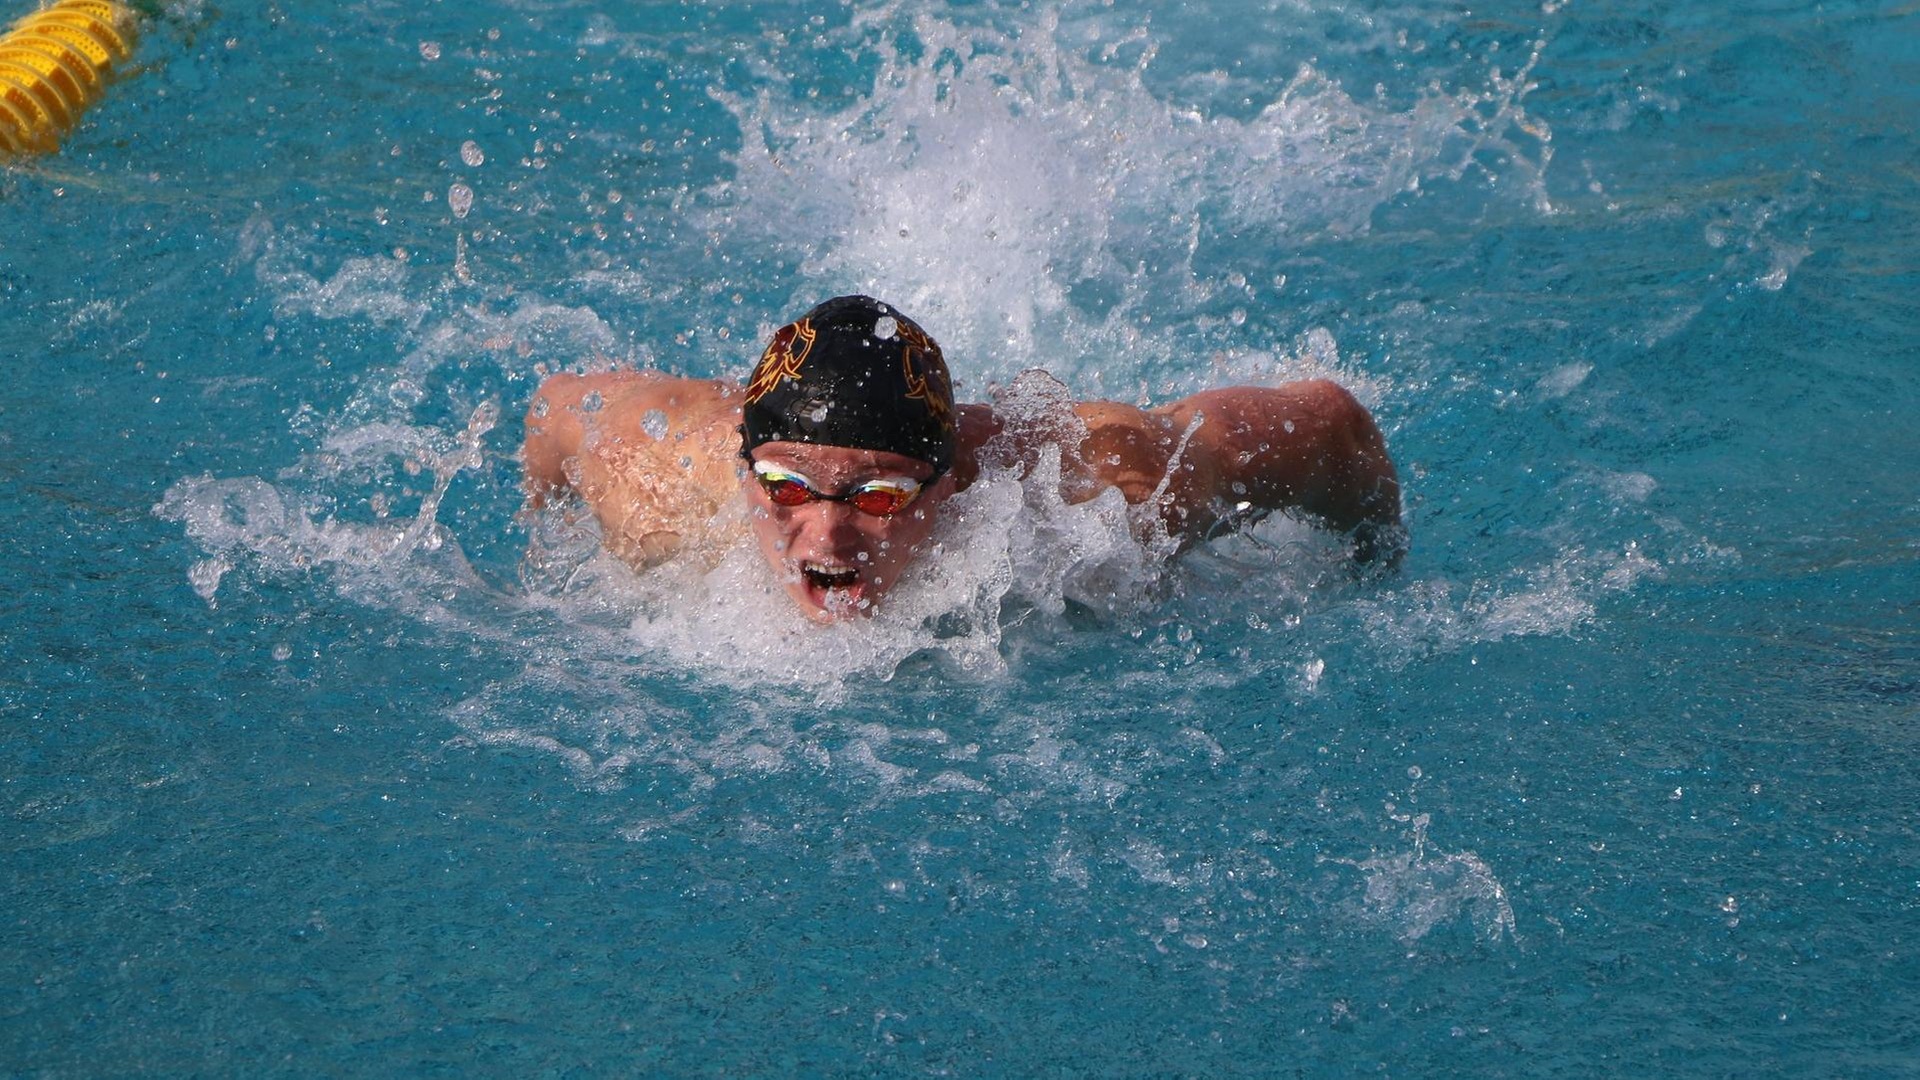 Tyler Headley earned wins in the 100 and 200 fly (photo by Stella Cheng)